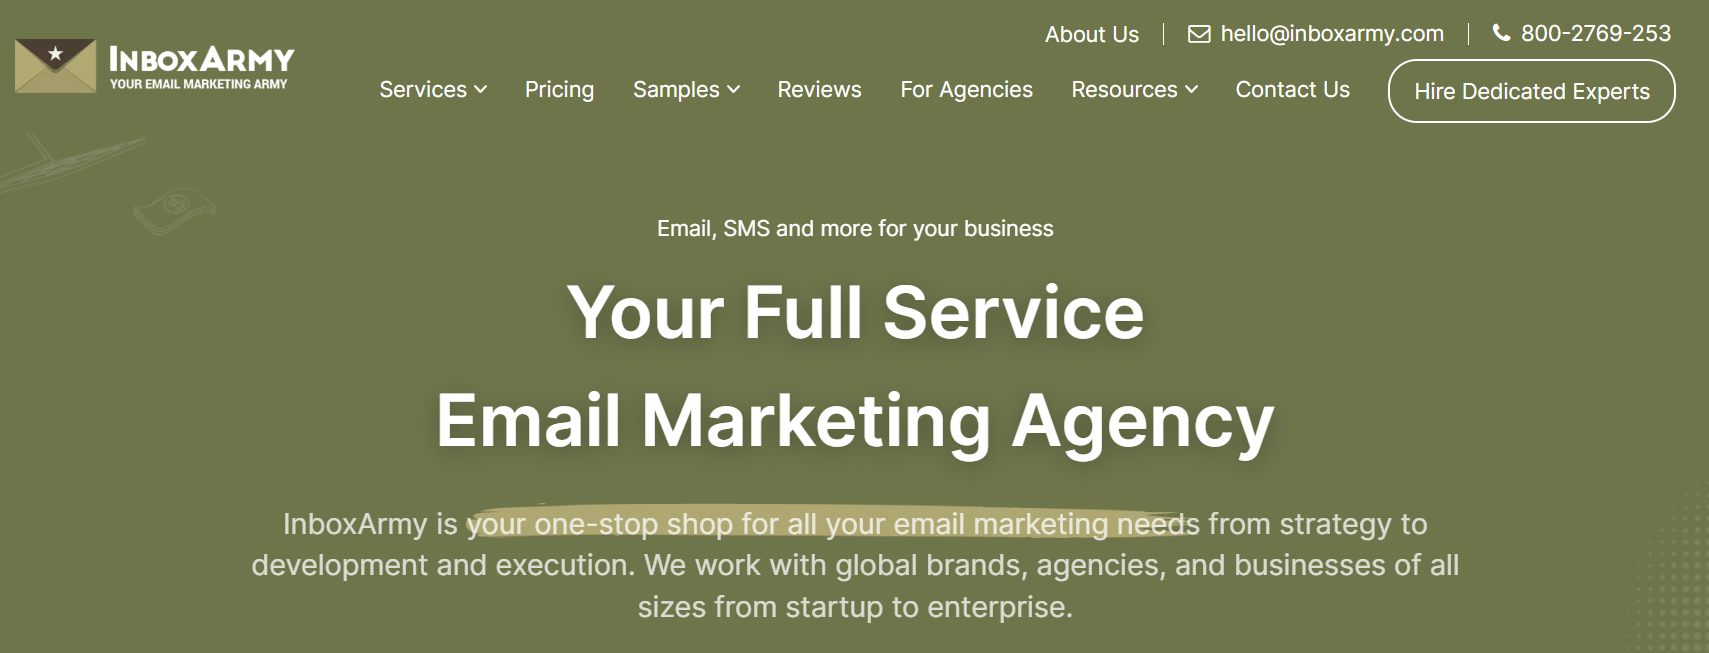 InboxArmy email marketing services